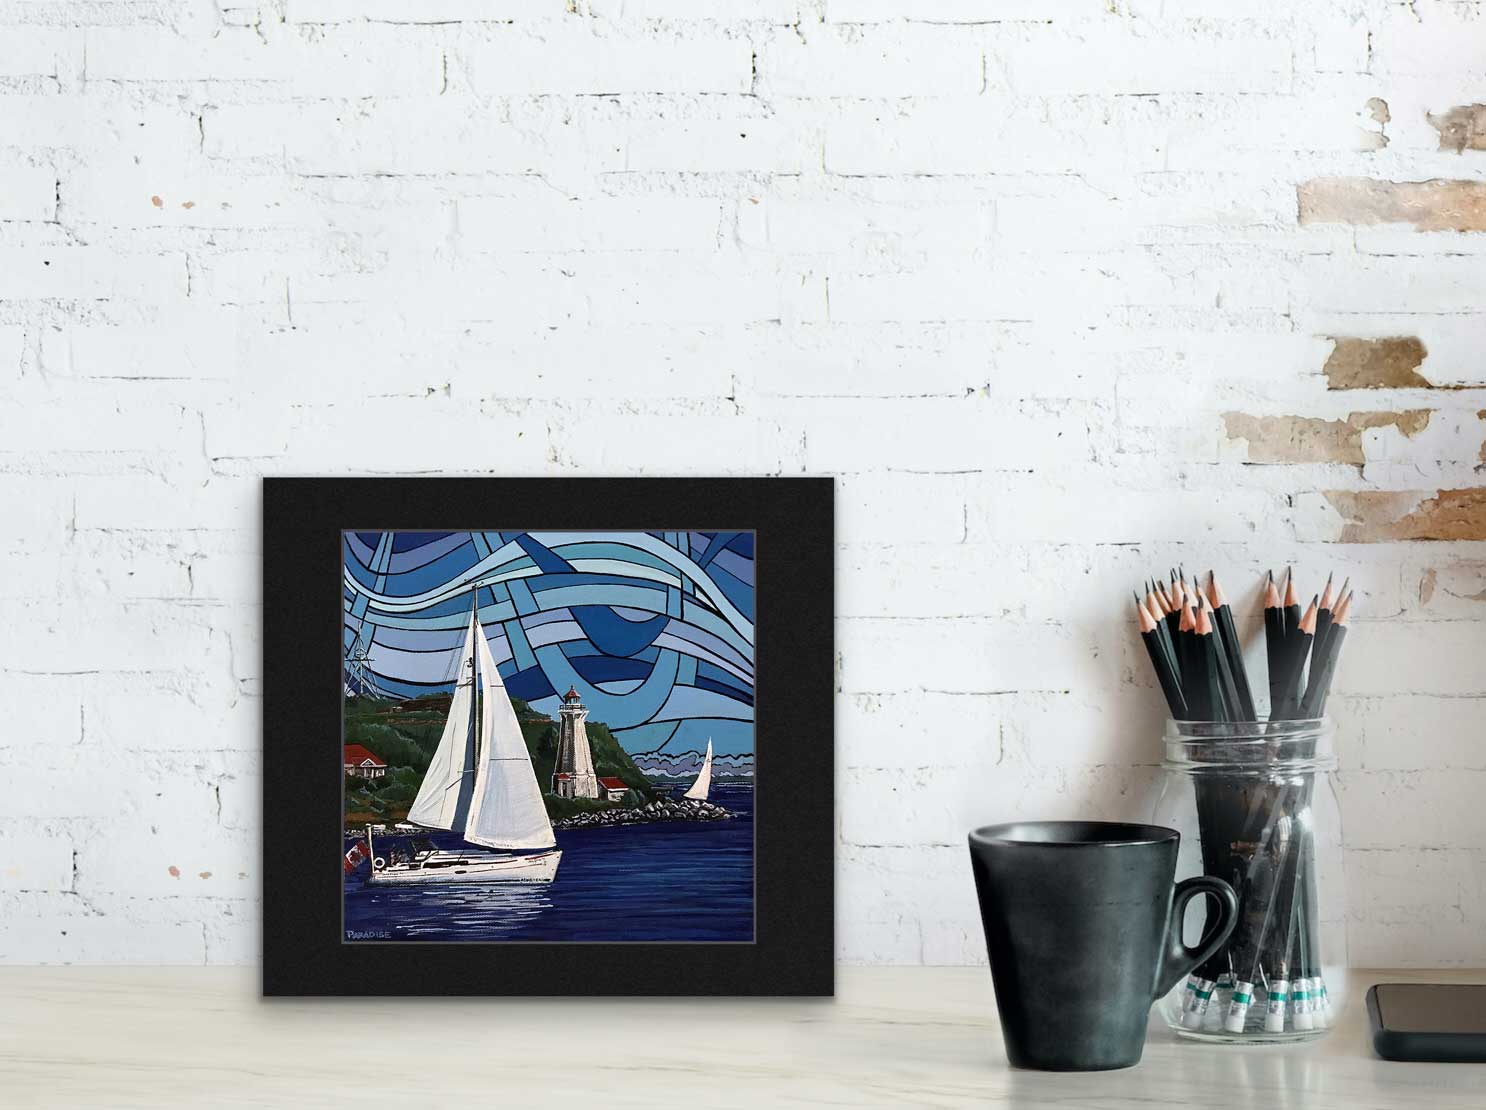 Elegant sailing boat cruising in the waters off Halifax Harbour Nova Scotia, while passing in front of Georges Island Lighthouse under a vibrant blue sky. High quality print from an Original painting by a professional Canadian landscape artist. visual art ready to hang on your wall.